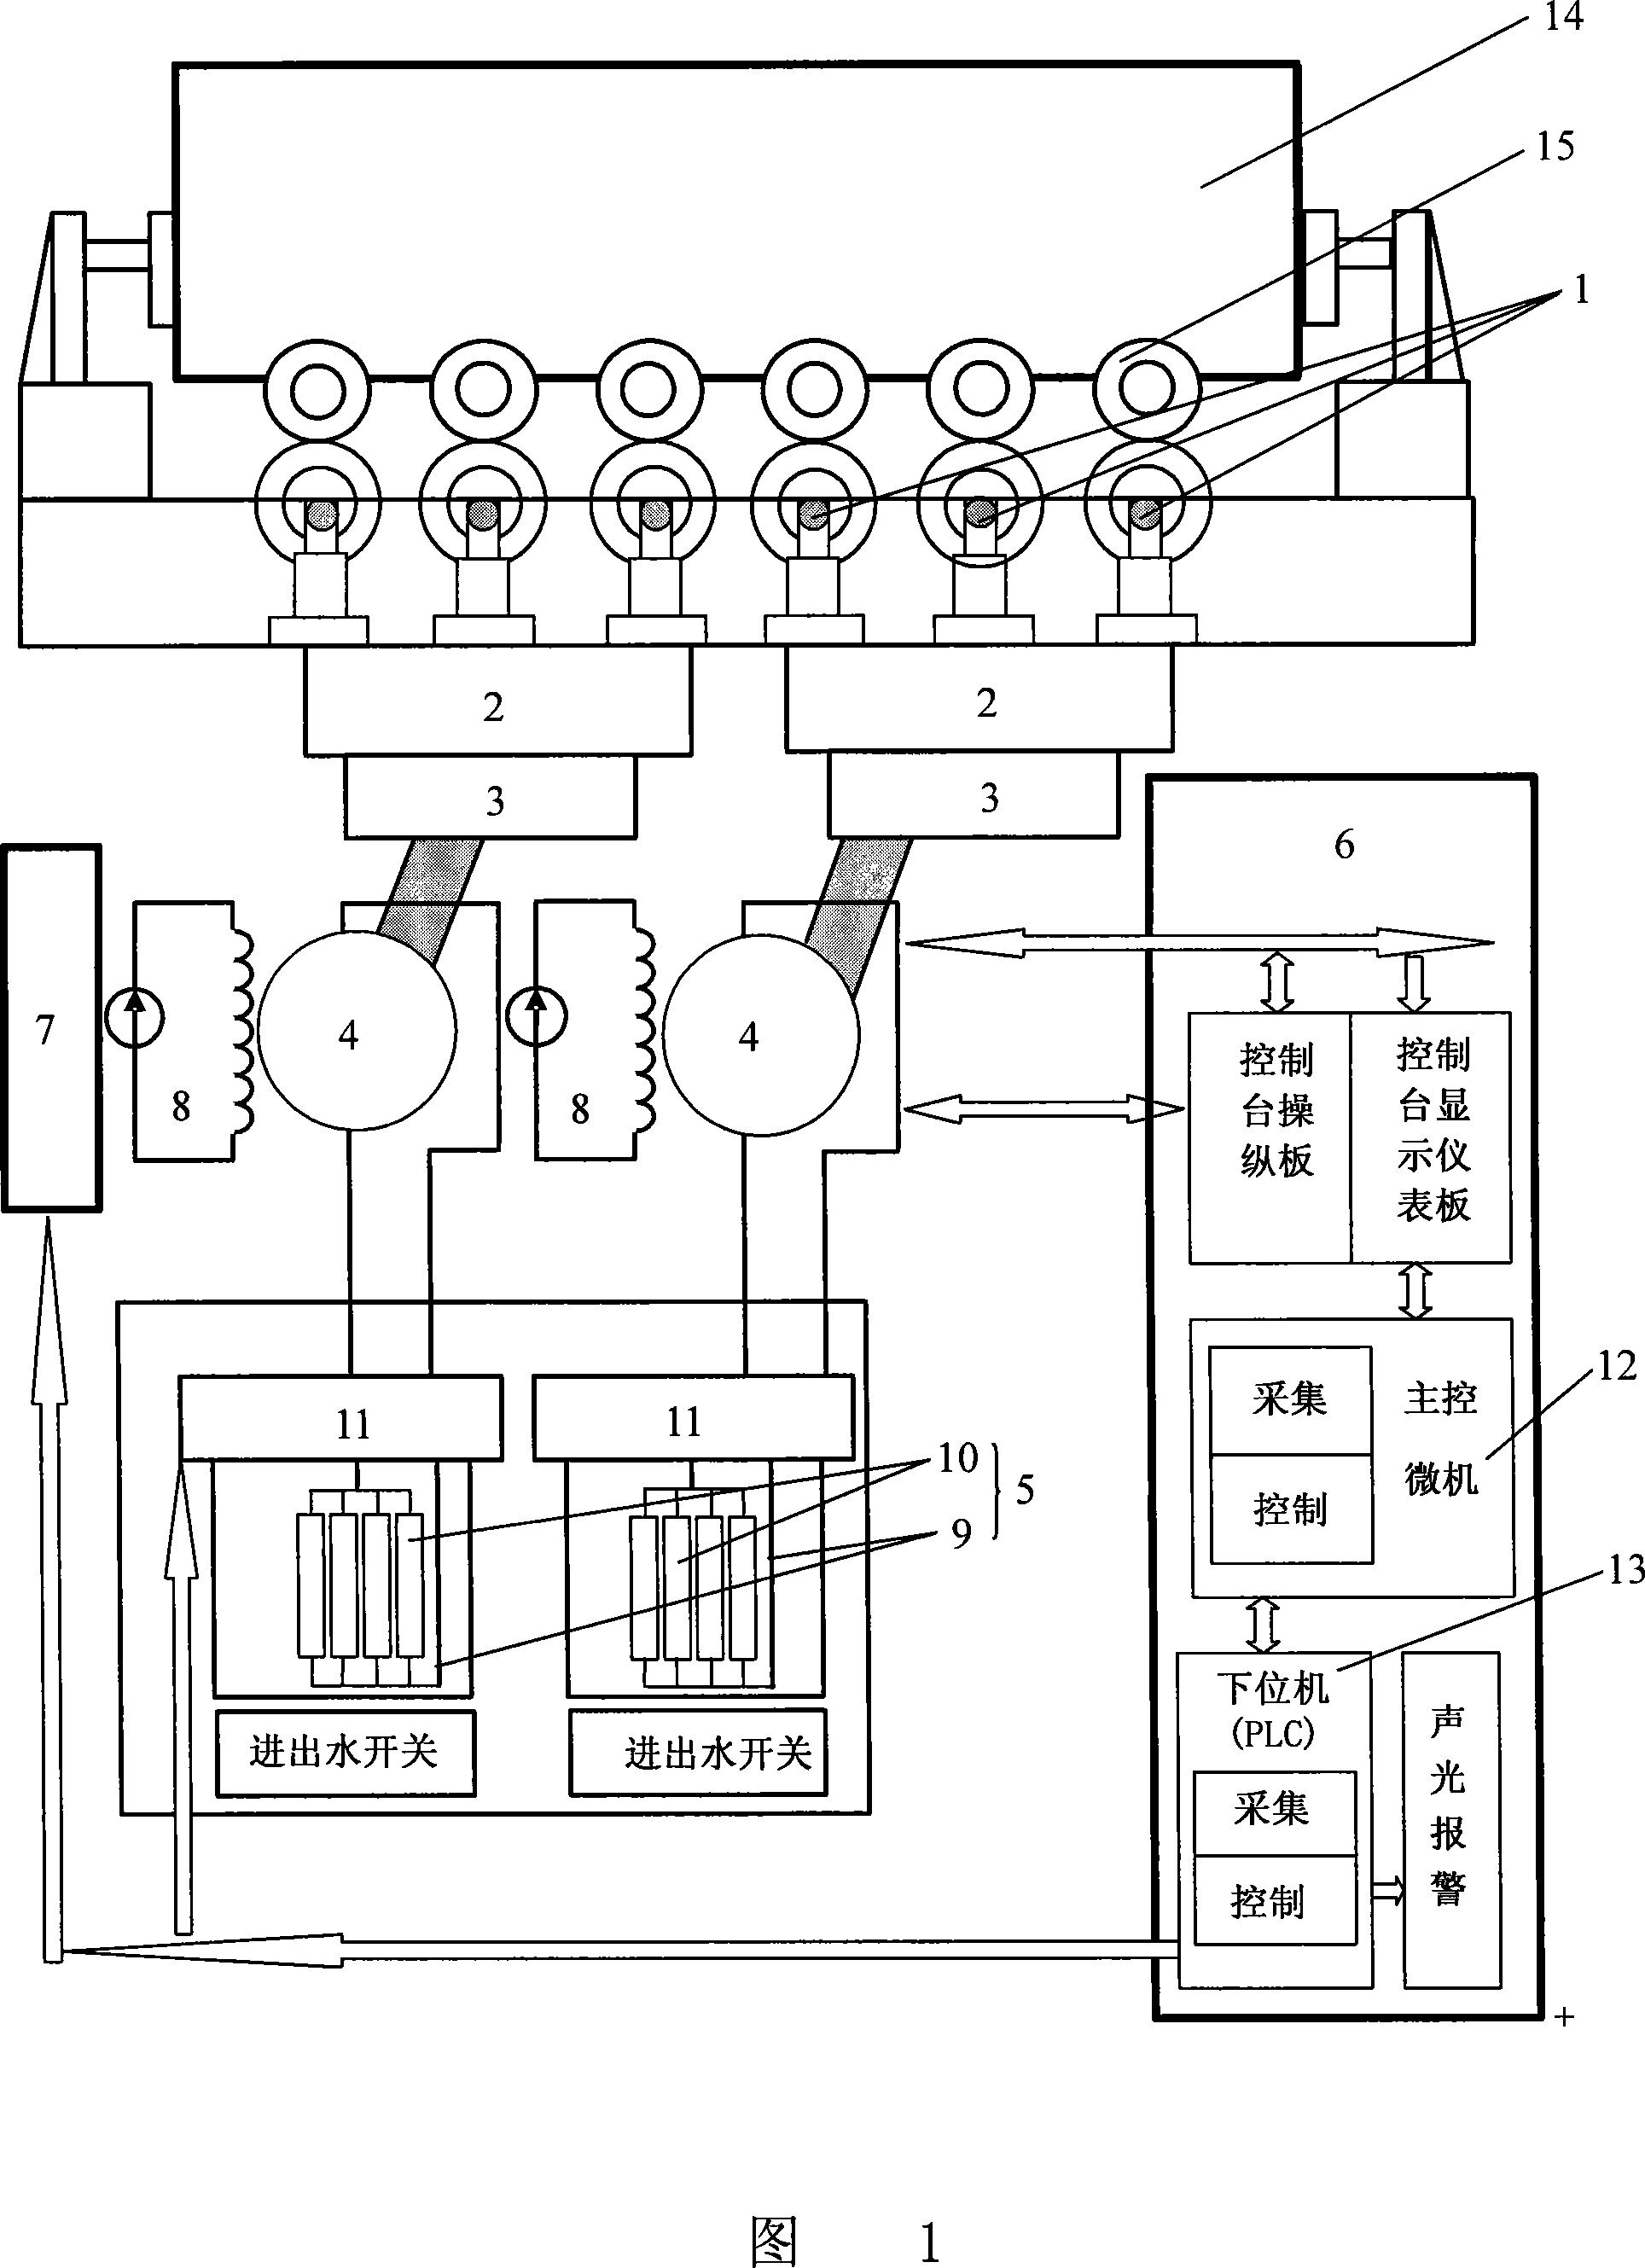 Synchronization controller for wheel pair speed of engine static-state test platform